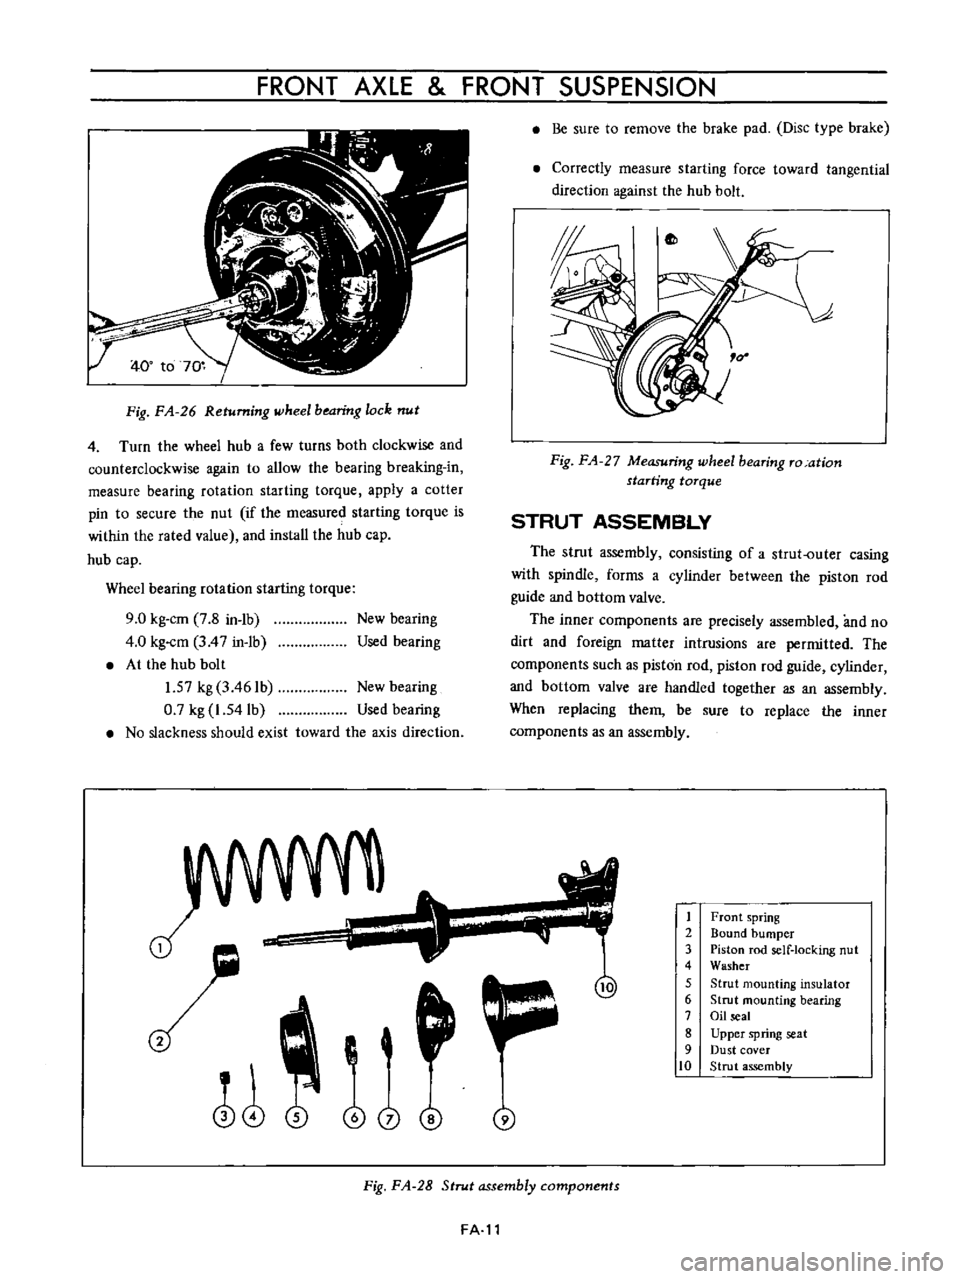 DATSUN B110 1973  Service Repair Manual 
FRONT 
AXLE

FRONT 
SUSPENSION

t
t

Fig 
FA 
26

Returning 
wheel

bearing 
lock 
nut

4 
Turn 
the 
wheel 
hub 
a 
few 
turns 
both 
clockwise 
and

counterclockwise

again 
to 
allow 
the

bearing